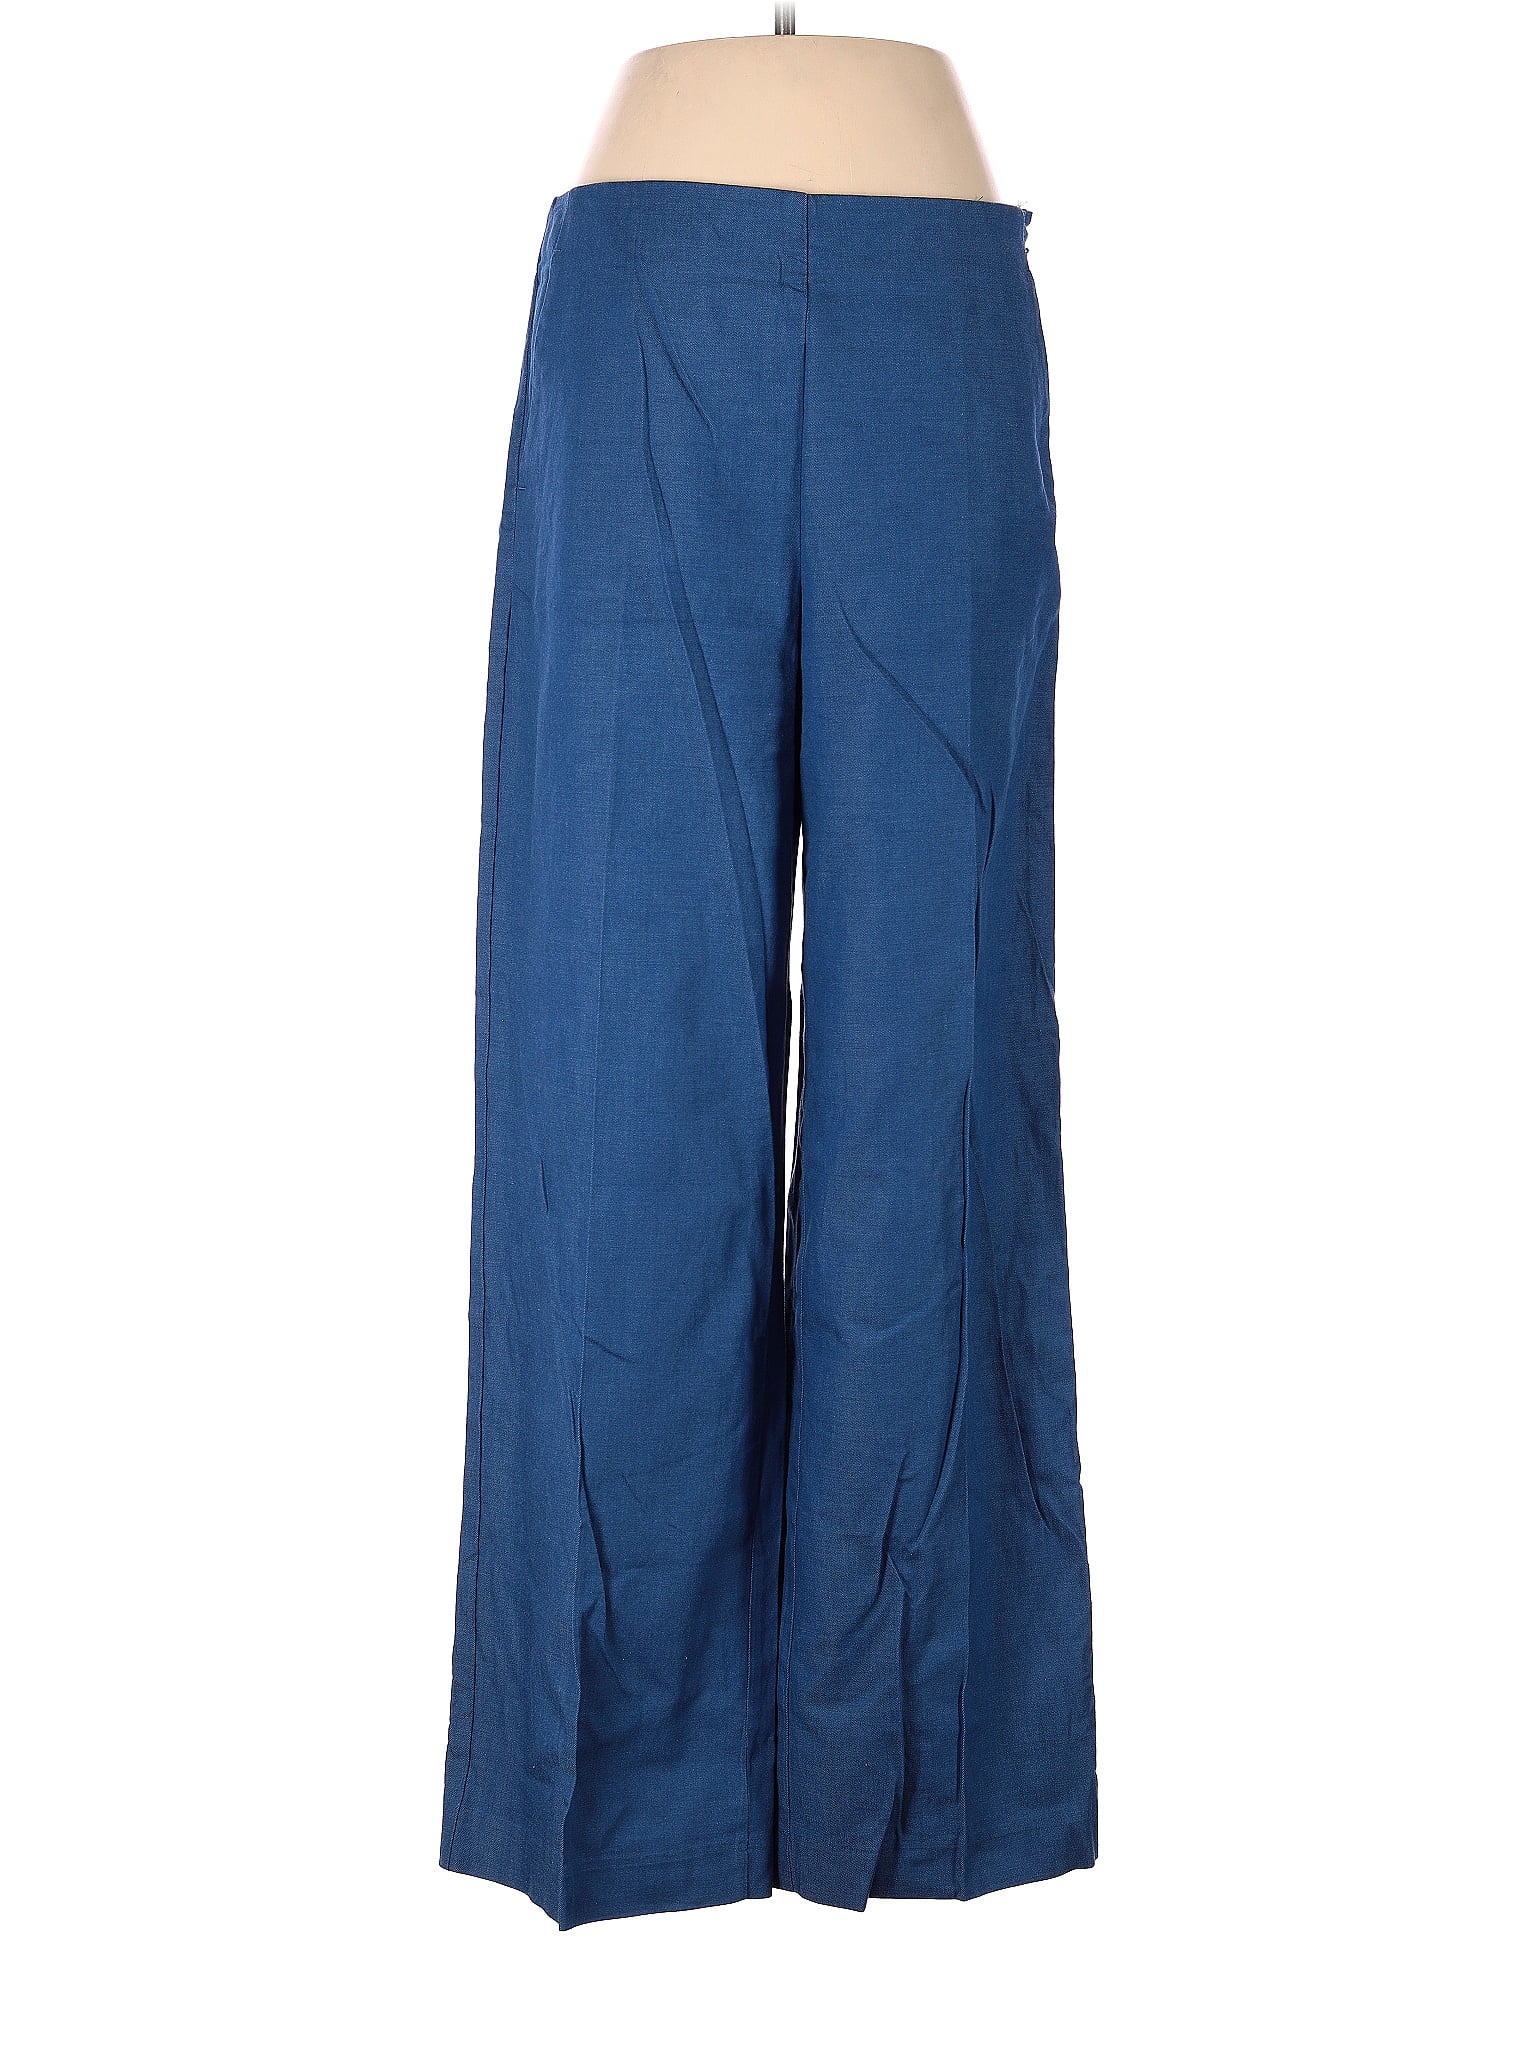 Ann Taylor Solid Blue Casual Pants Size 6 - 74% off | thredUP